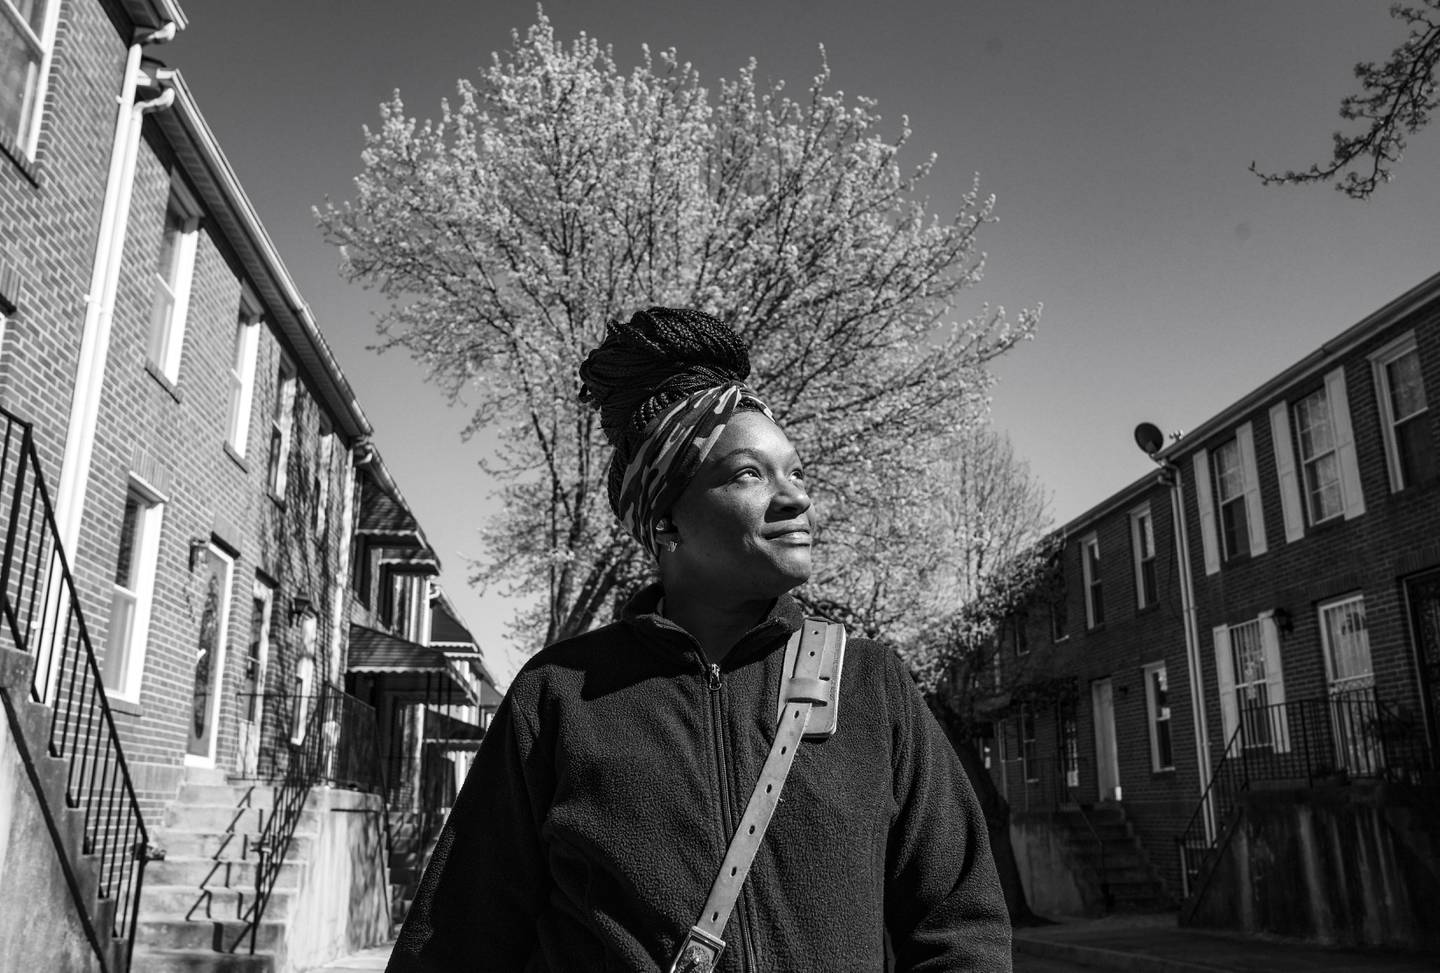 Nakitah Holland stops for a portrait in the corridors along U.S. Route 40 in Baltimore, Wednesday, March 8, 2023. Holland said her grandmother's house was within a few blocks of the highway and she always cherished how much green space it had. If repurposed, she'd like to see more grass in the highway's footprint, but beyond that, she's not sure what else the city could do with it.